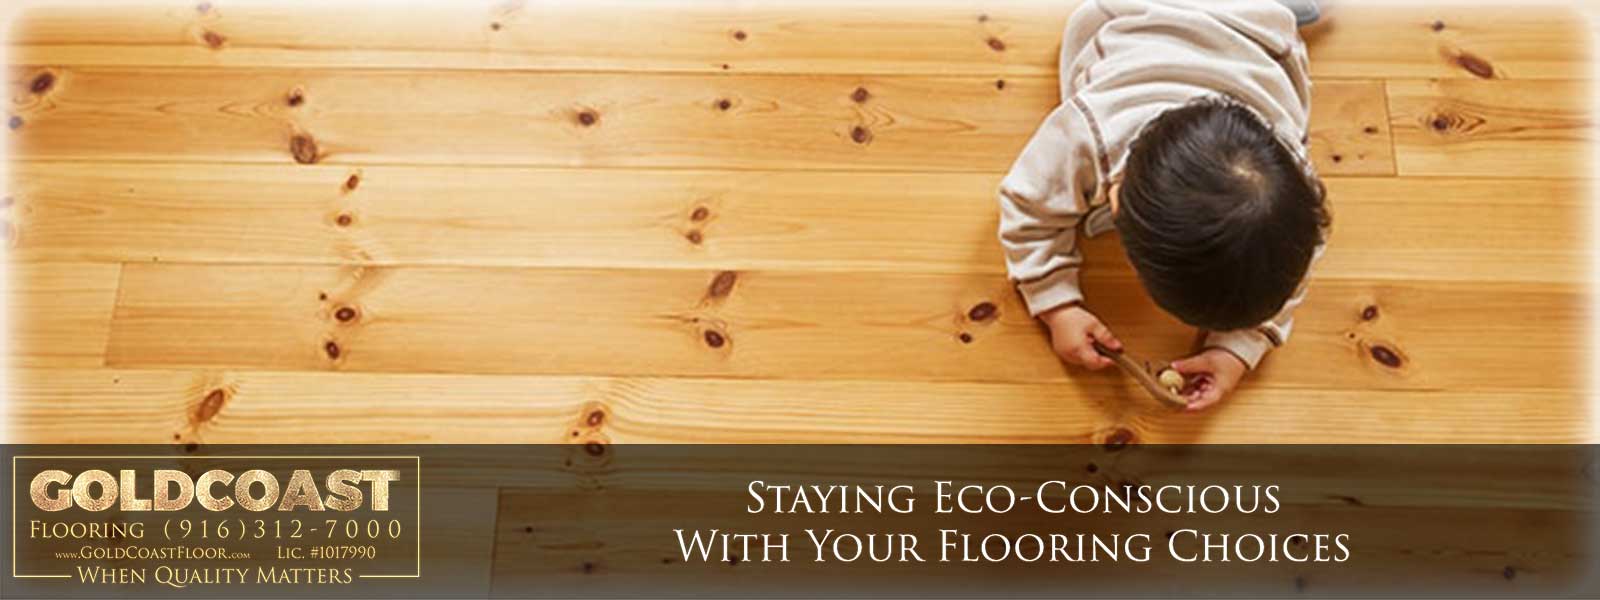 Staying Eco-Conscious With Your Flooring Choices